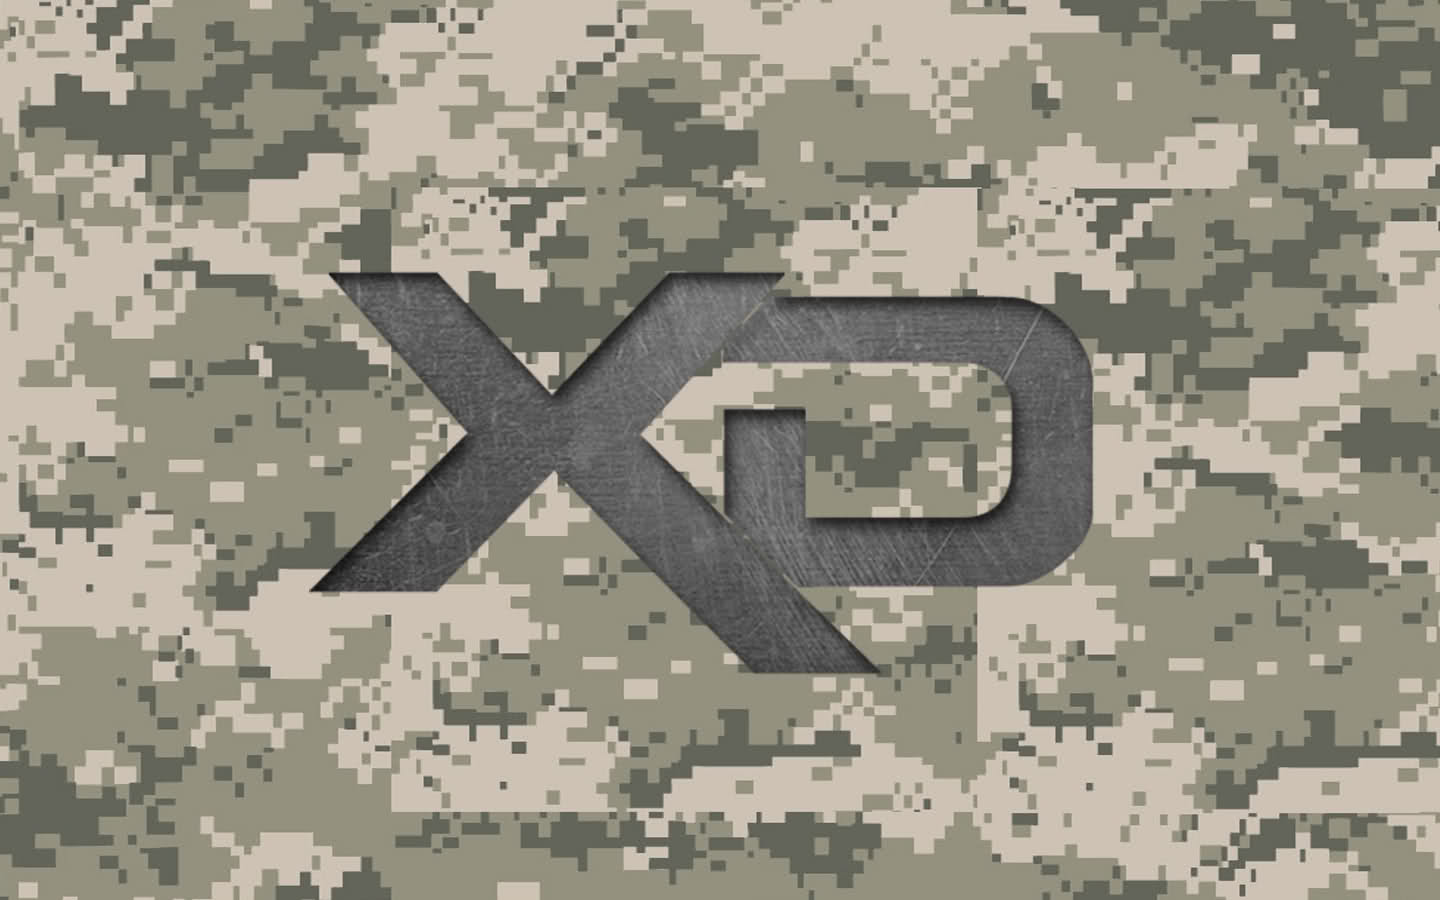 Made an XD Wallpaper COME GET IT Springfield XD Forum